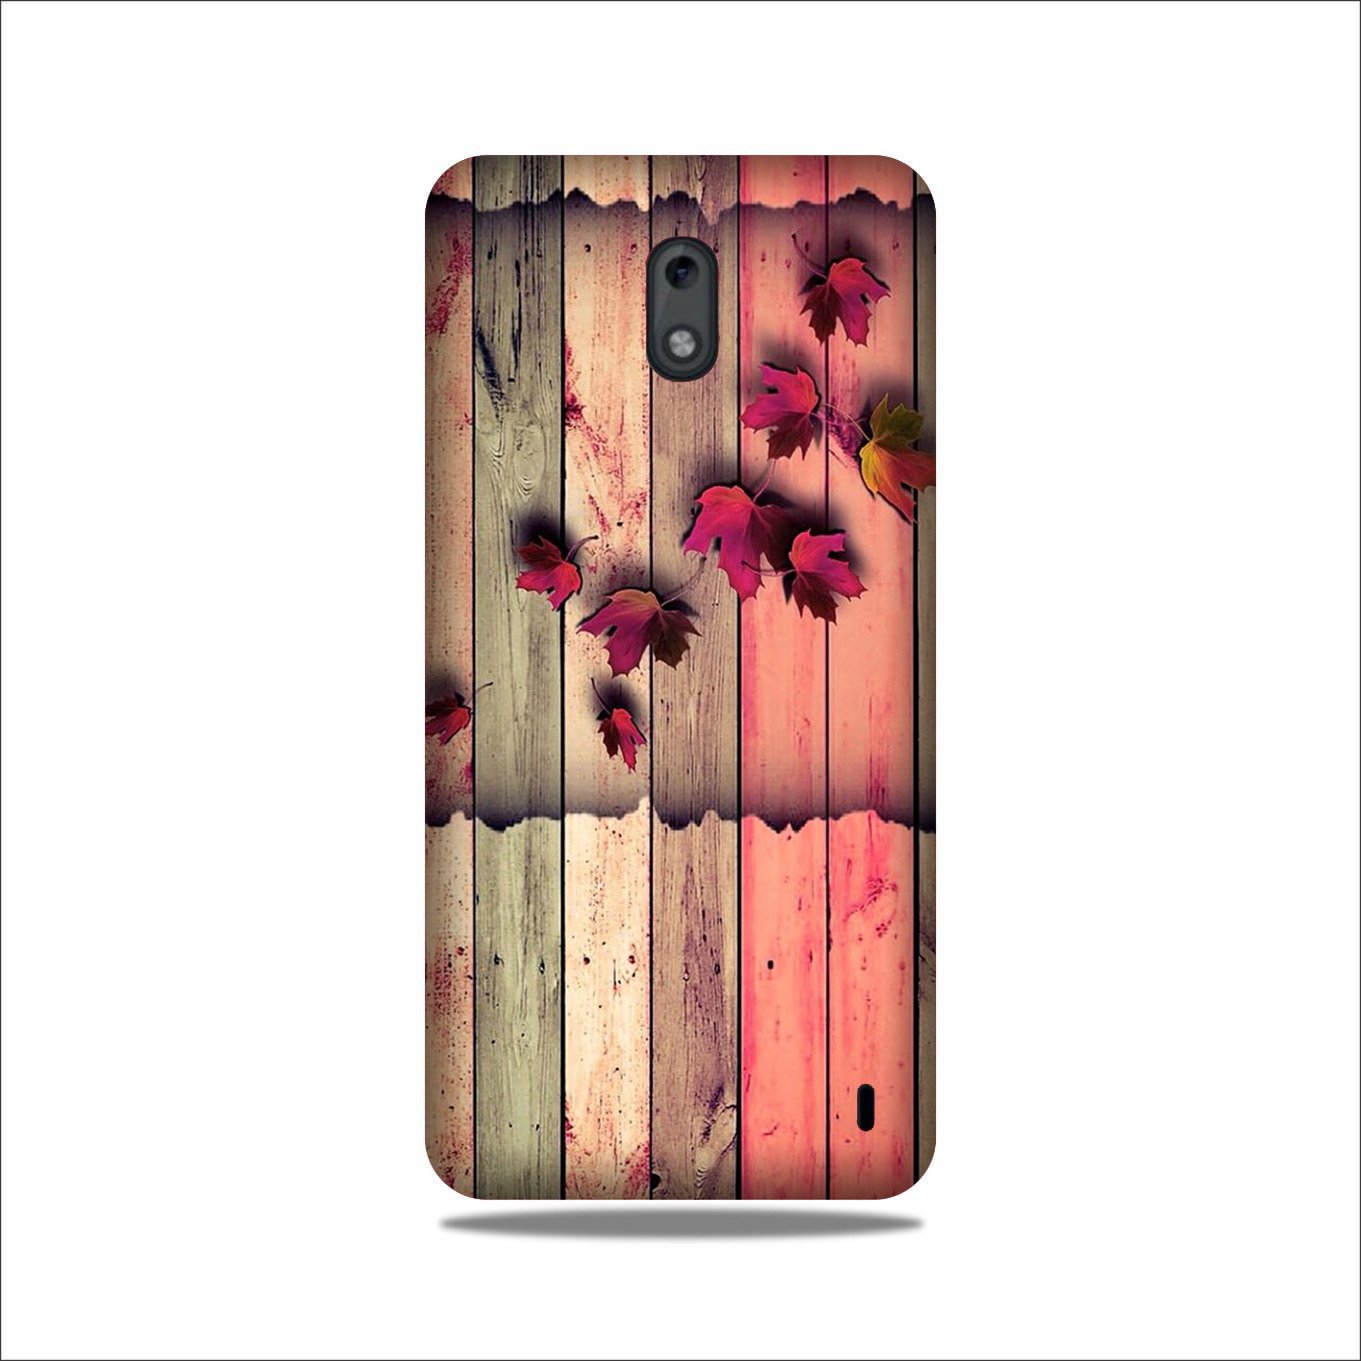 Wooden look2 Case for Nokia 3